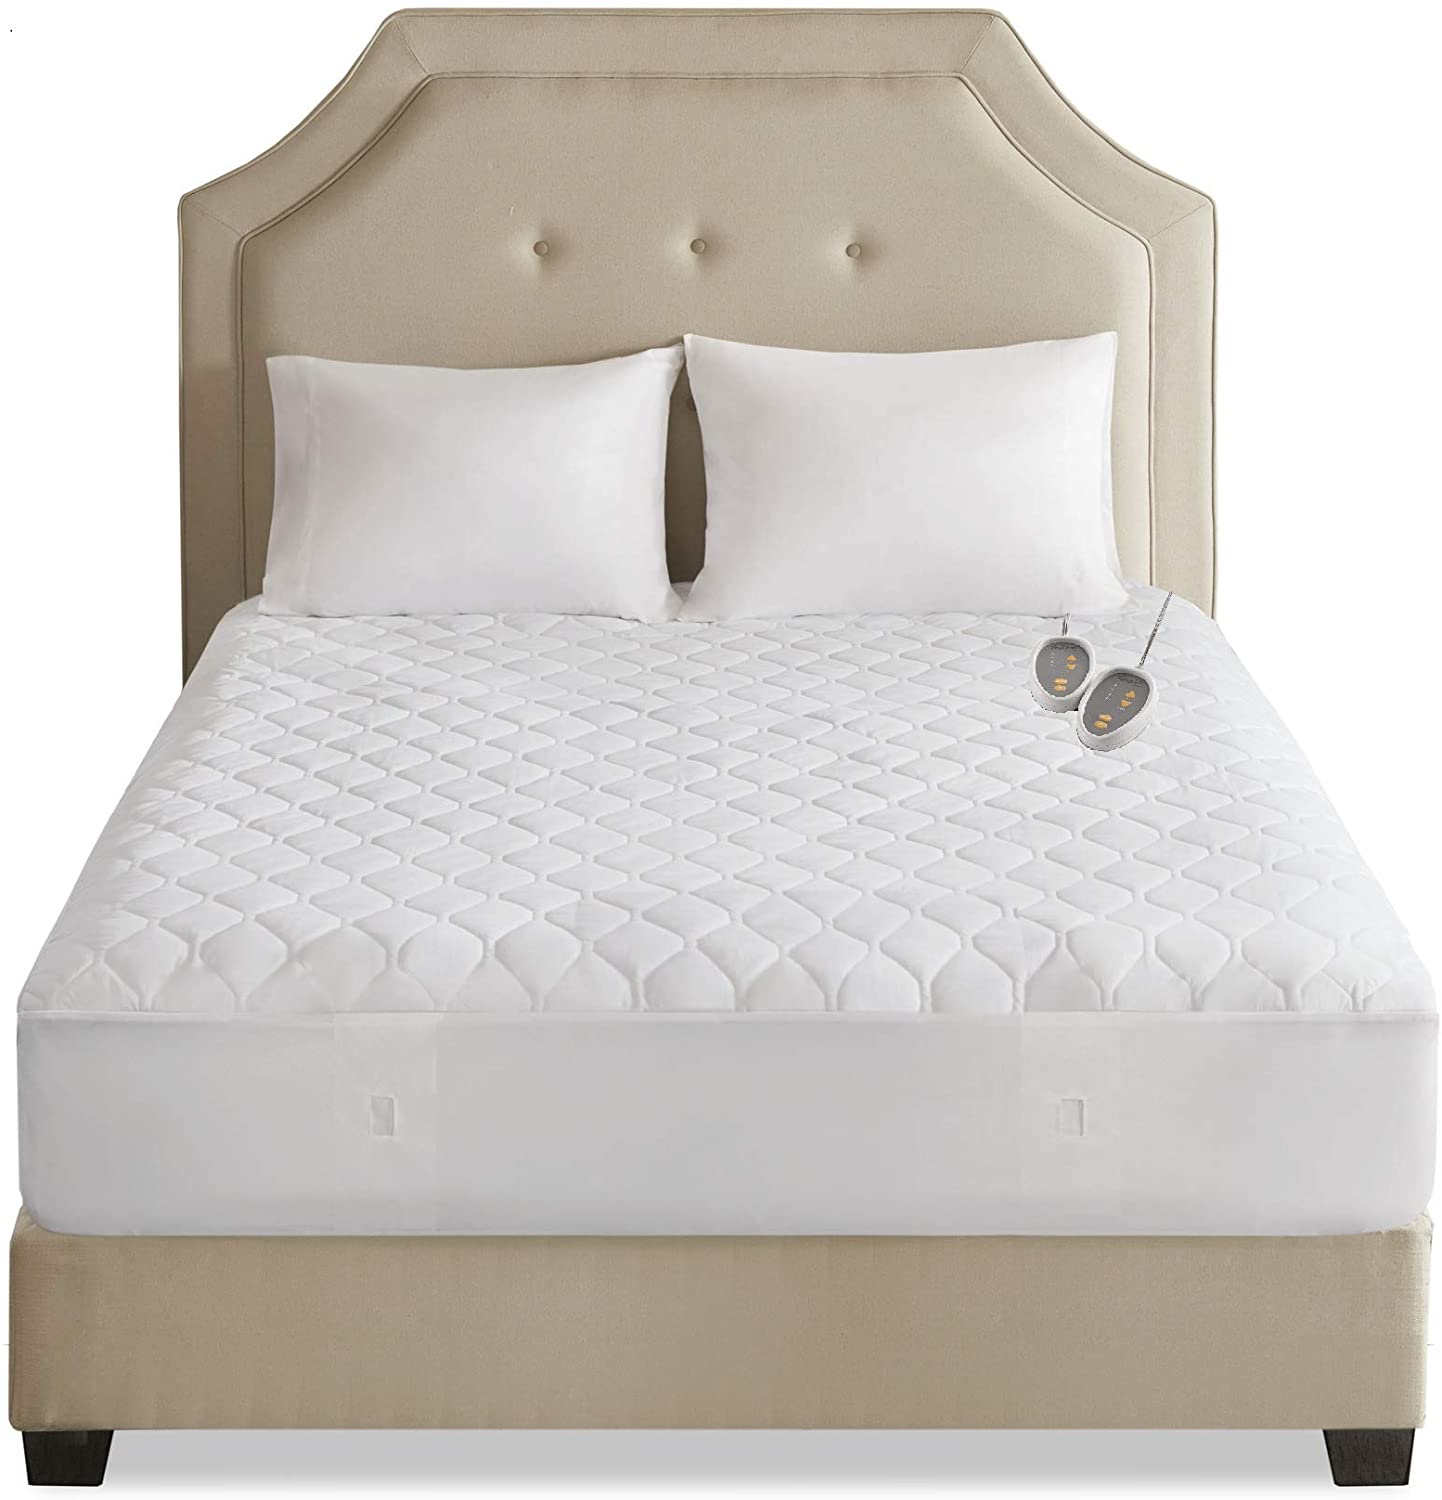 Quilted Heated Mattress Pad Mattress Heating Pad Electric Bed Warmer Cover Deep - $98.24 - $183.46